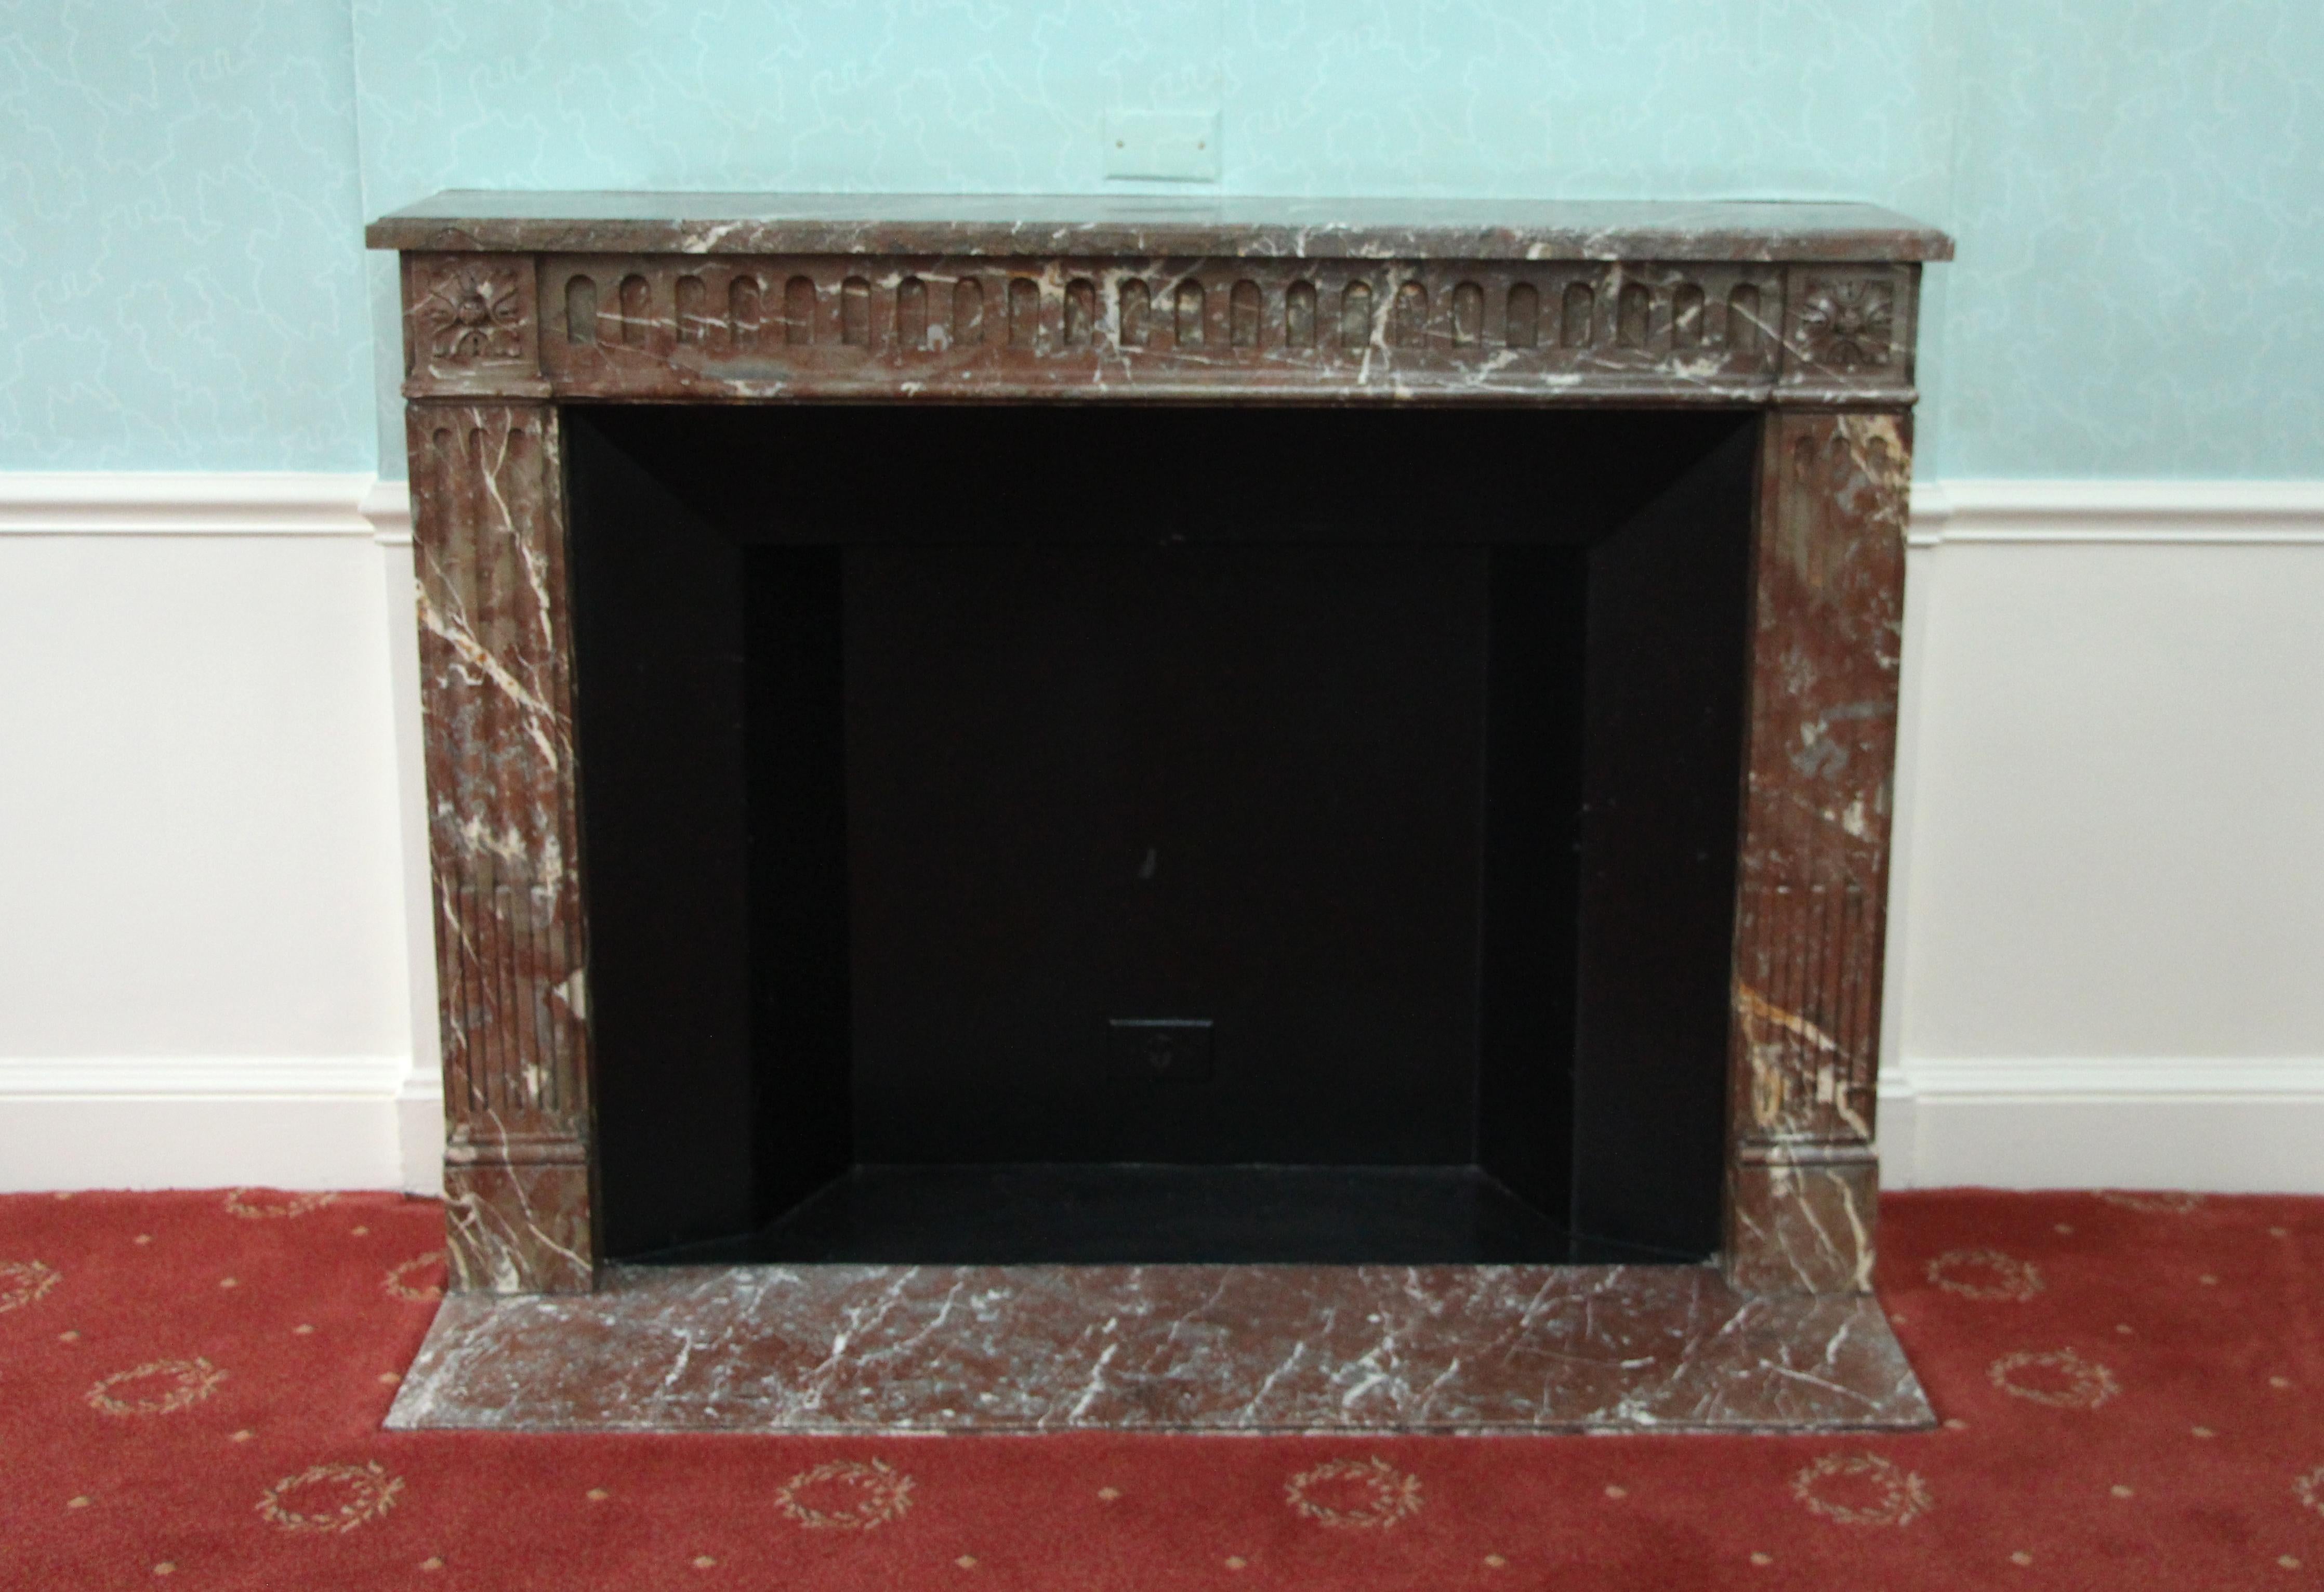 Hearth not included. Louis XVI French Regency earth tone brown marble mantel reclaimed from the most recent renovation to the Waldorf Astoria Hotel in New York City. This mantel was one of a group of antique mantels imported from Europe and